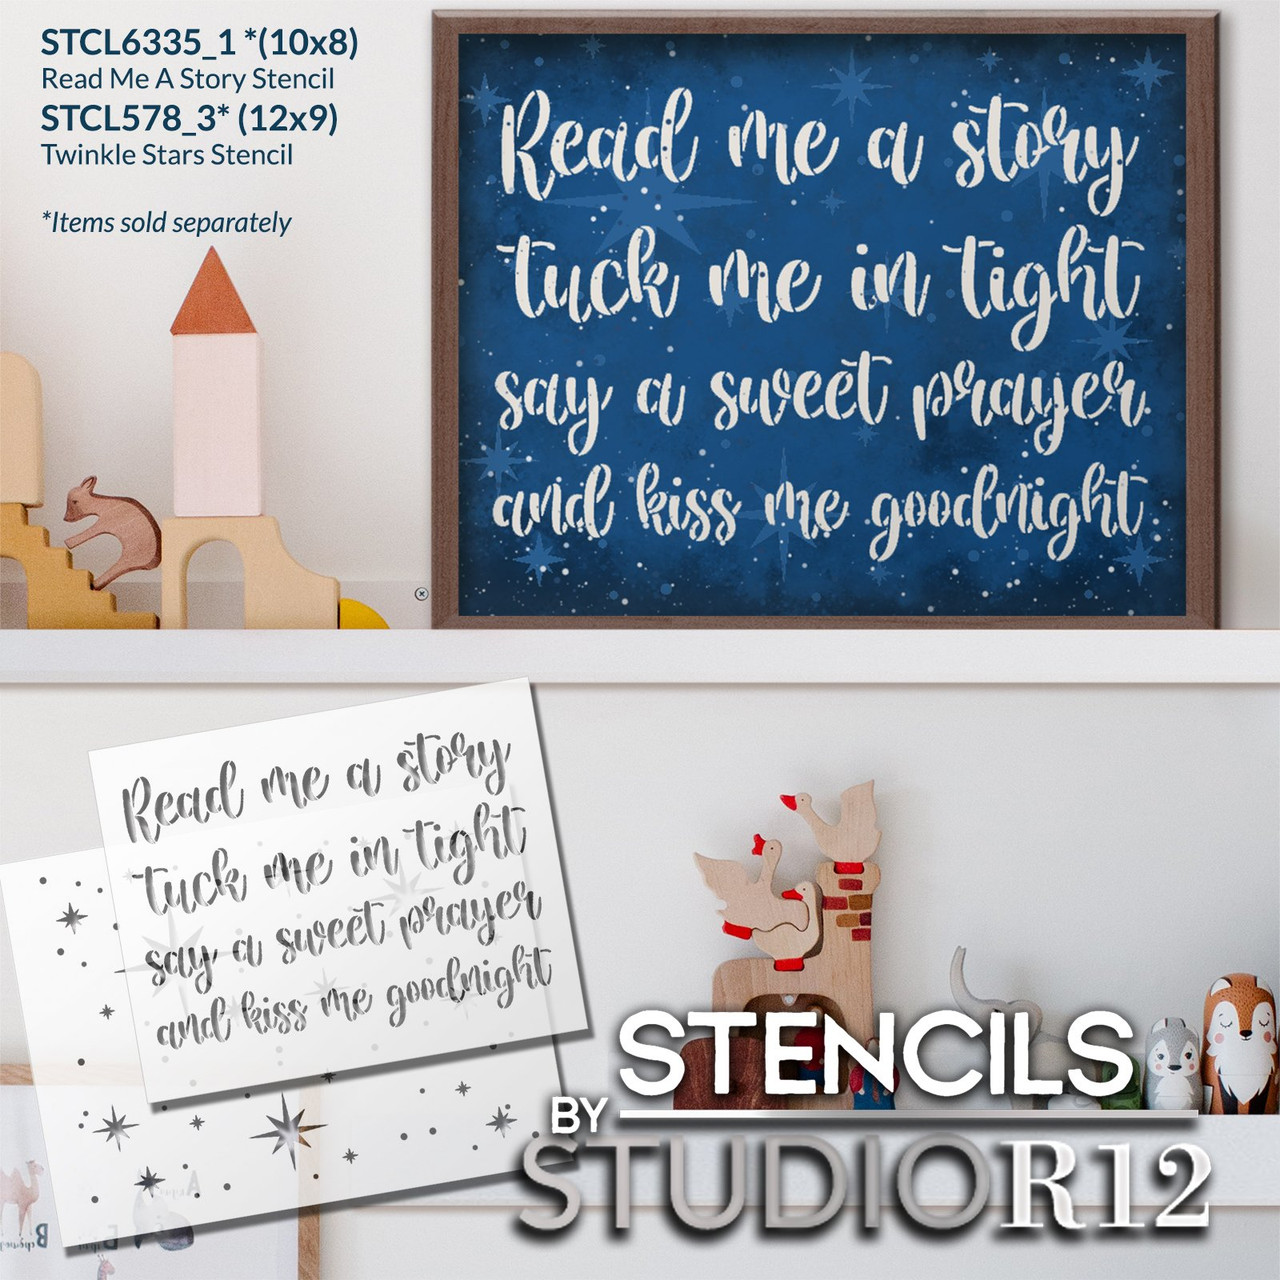 Read Me a Story, Tuck Me in Tight Stencil by StudioR12 | Kids Room, Baby Shower | Craft DIY Nursery Decor | Paint Wood - Canvas Sign | Select Size